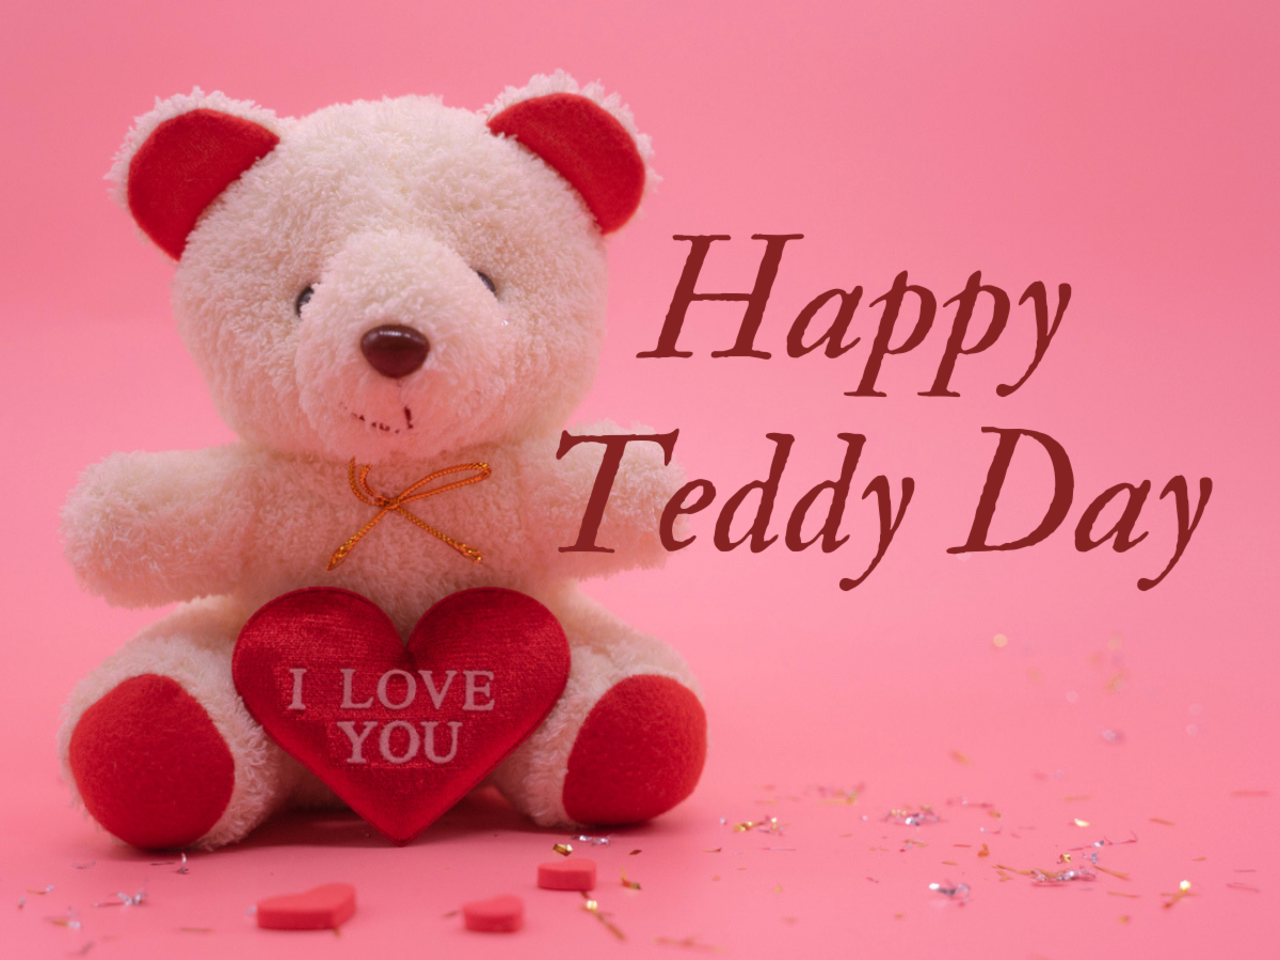 Happy Teddy Day 2020: Images, Quotes, Wishes, Greetings, Messages ...